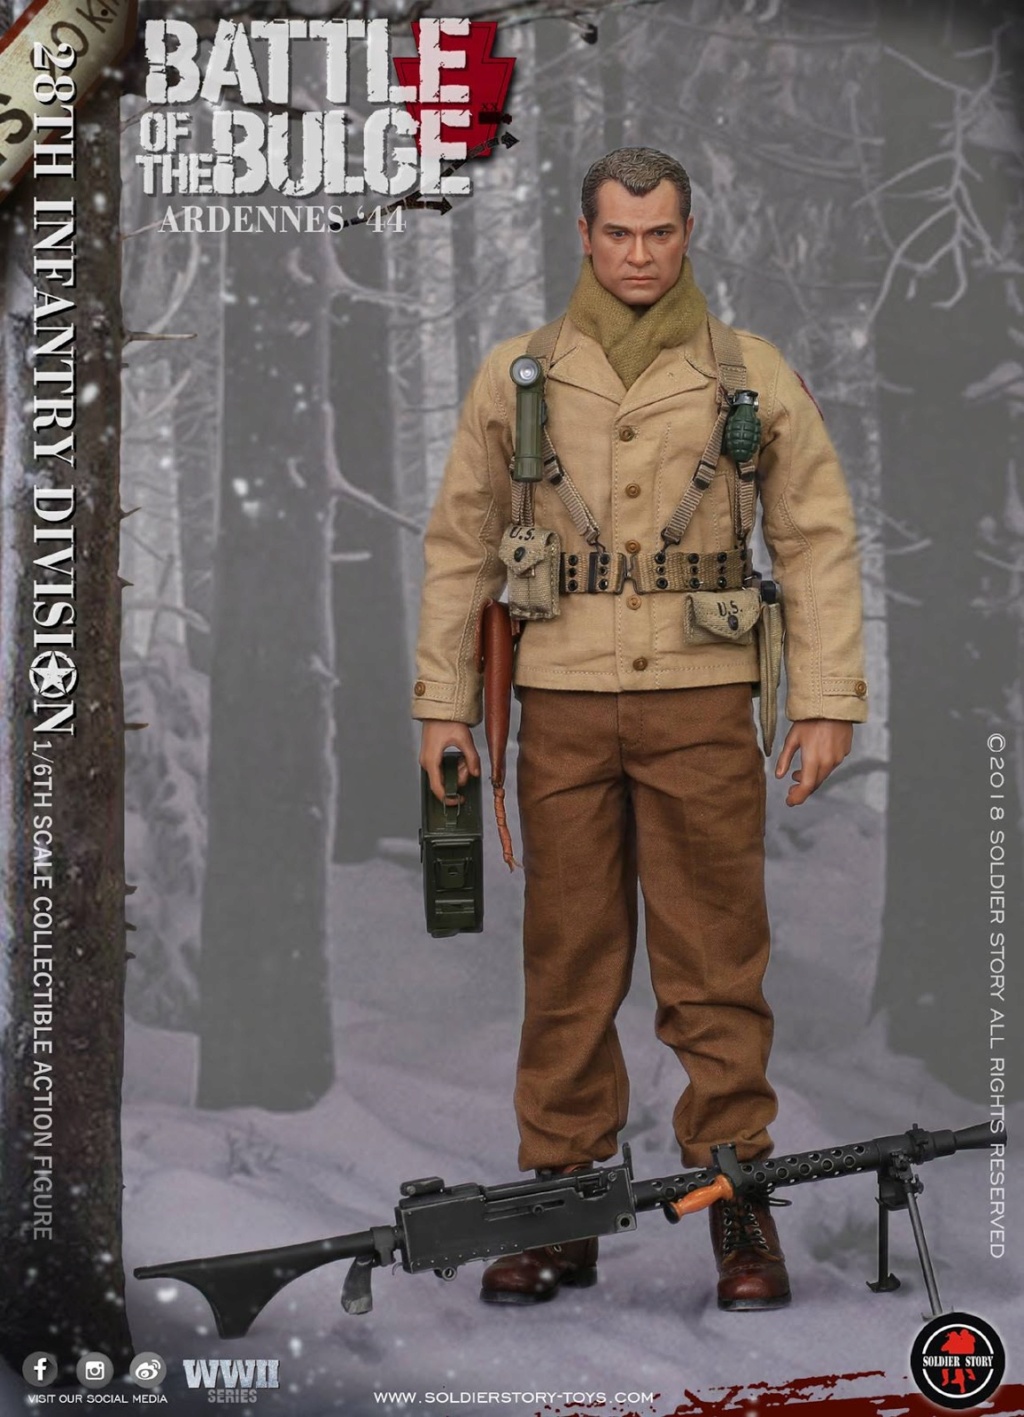 Soldierstory - NEW PRODUCT: Soldier Story: 1/6 scale U.S. Army 28th Infantry Division Ardennes 1944 Bulge112